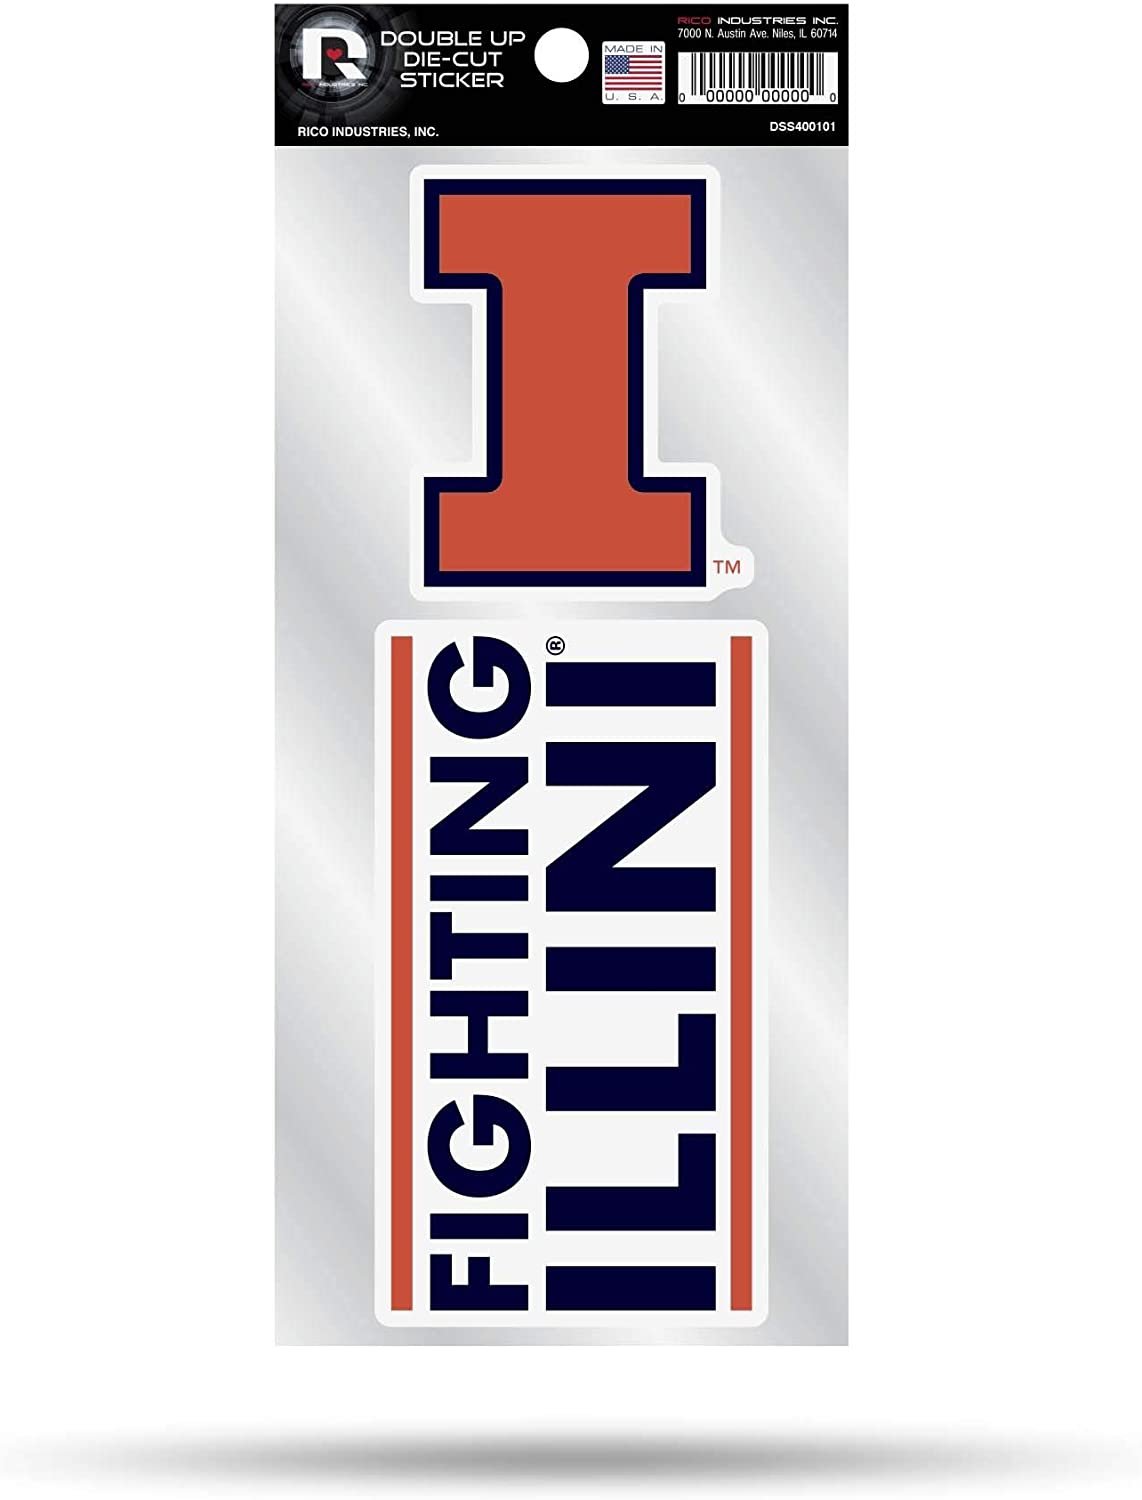 University of Illinois Fighting Illini 2-Piece Double Up Die Cut Sticker Decal Sheet, 4x8 Inch